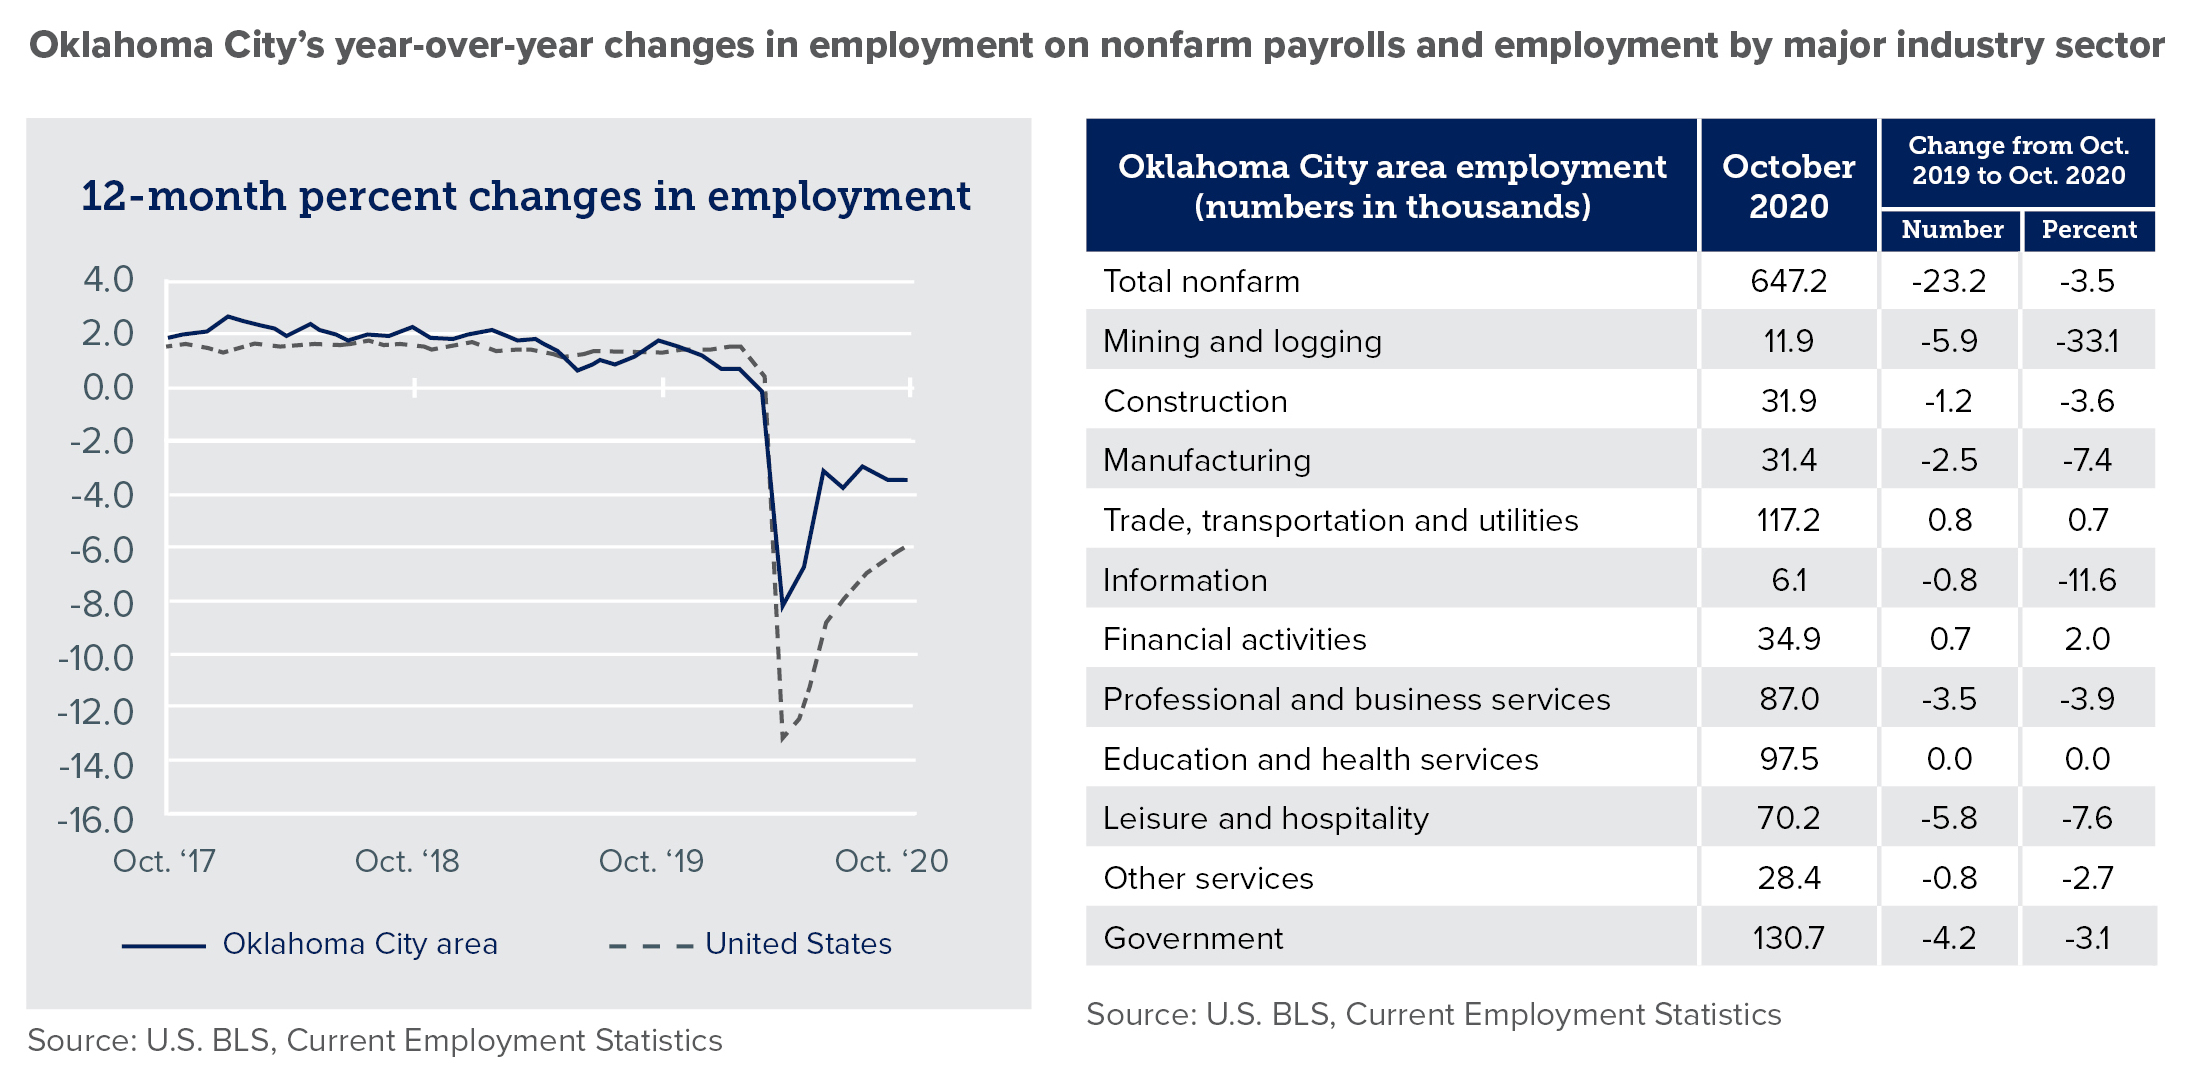 OKC's year-over-year changes in employment on nonfarm payrolls and employment by major industry sector